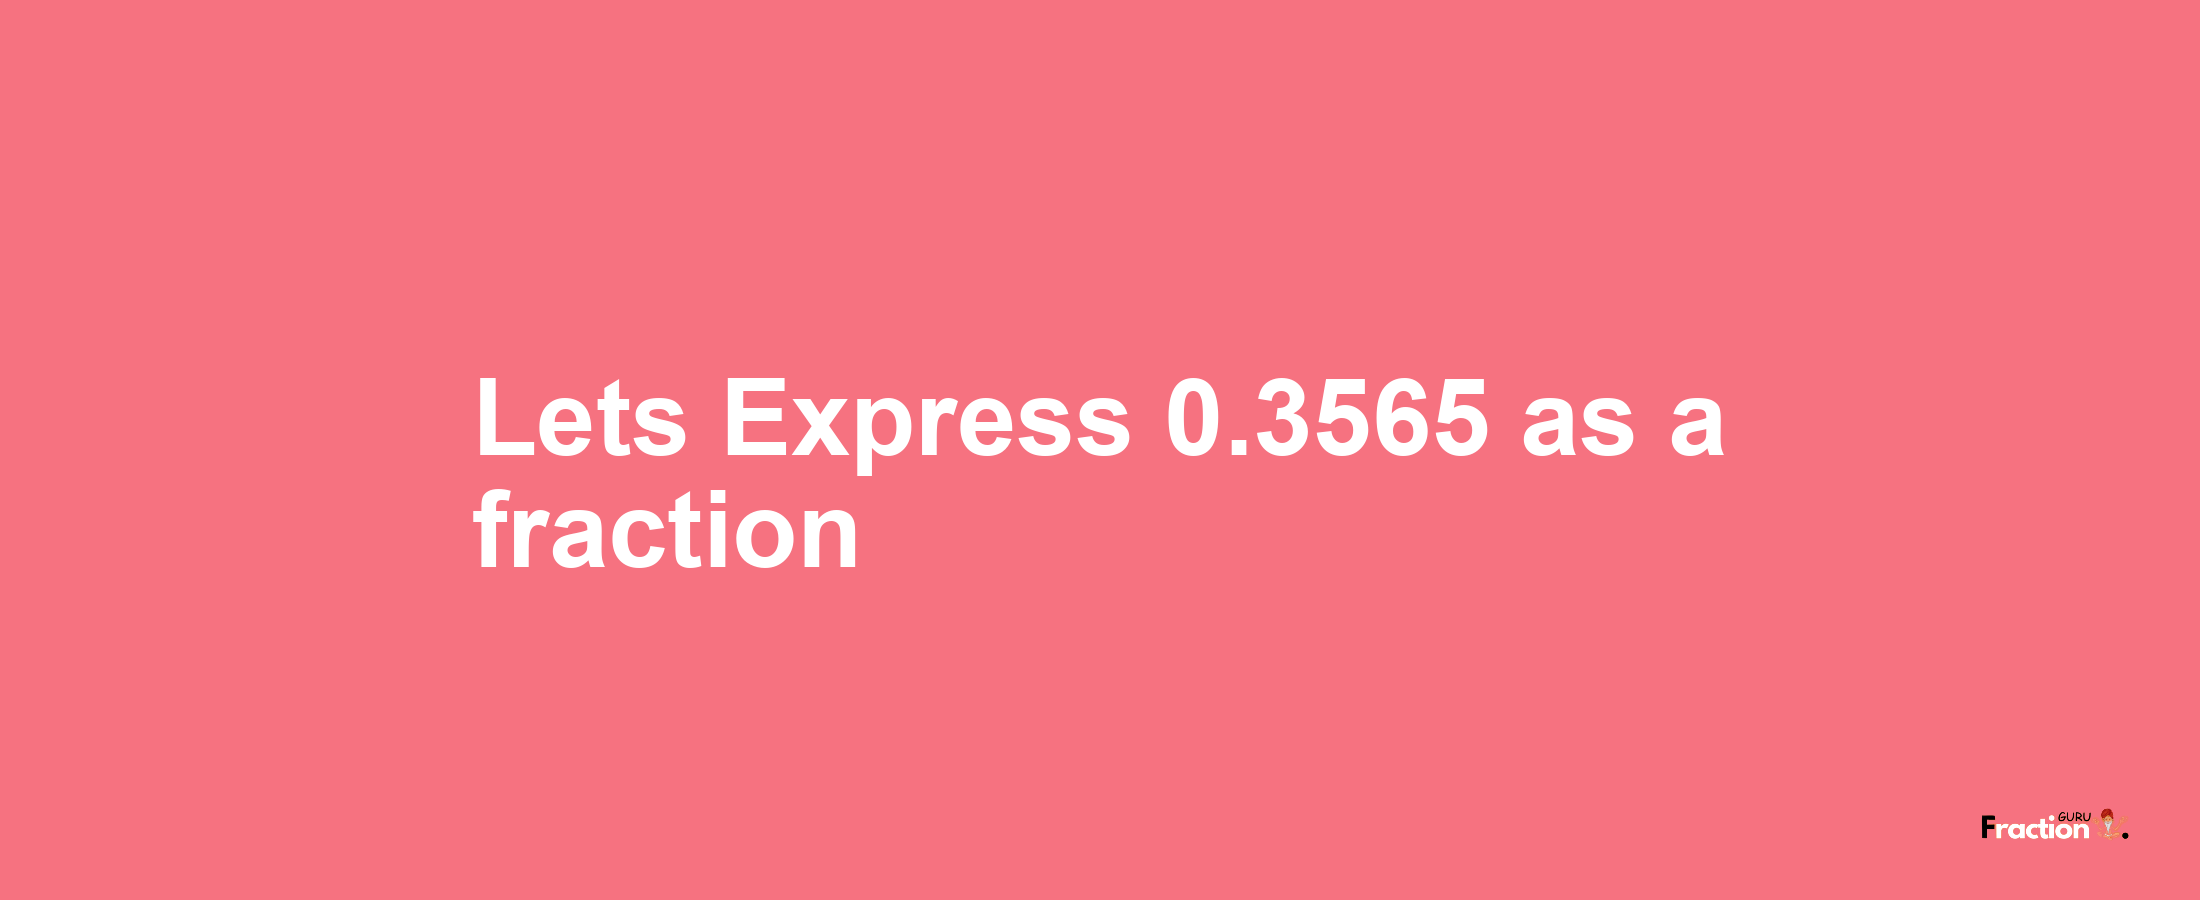 Lets Express 0.3565 as afraction